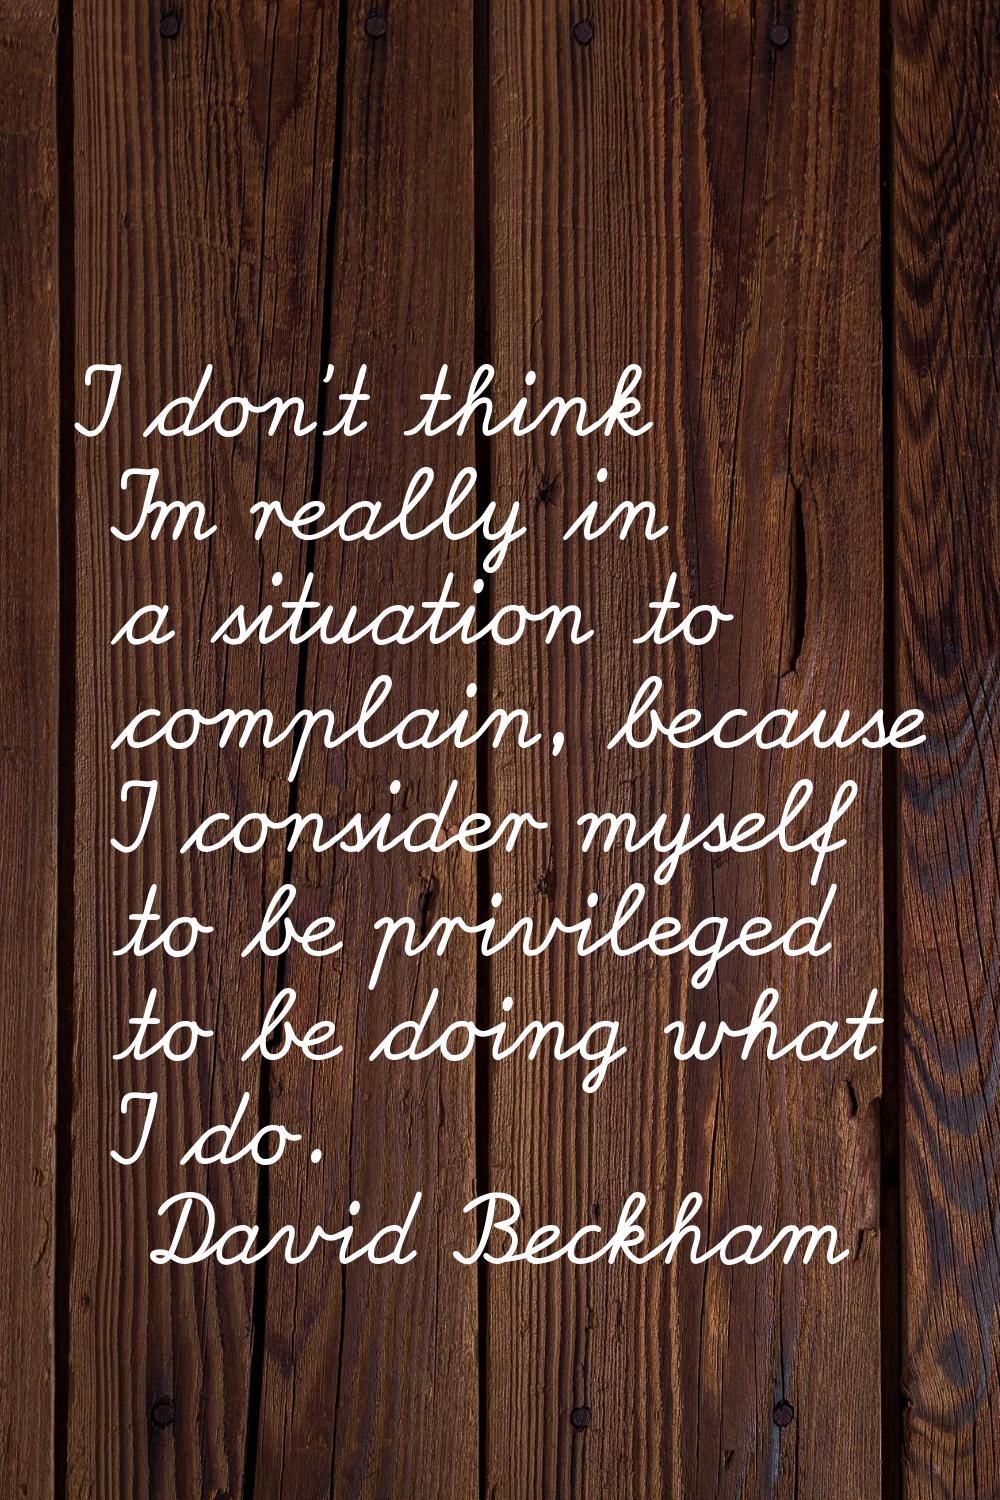 I don't think I'm really in a situation to complain, because I consider myself to be privileged to 